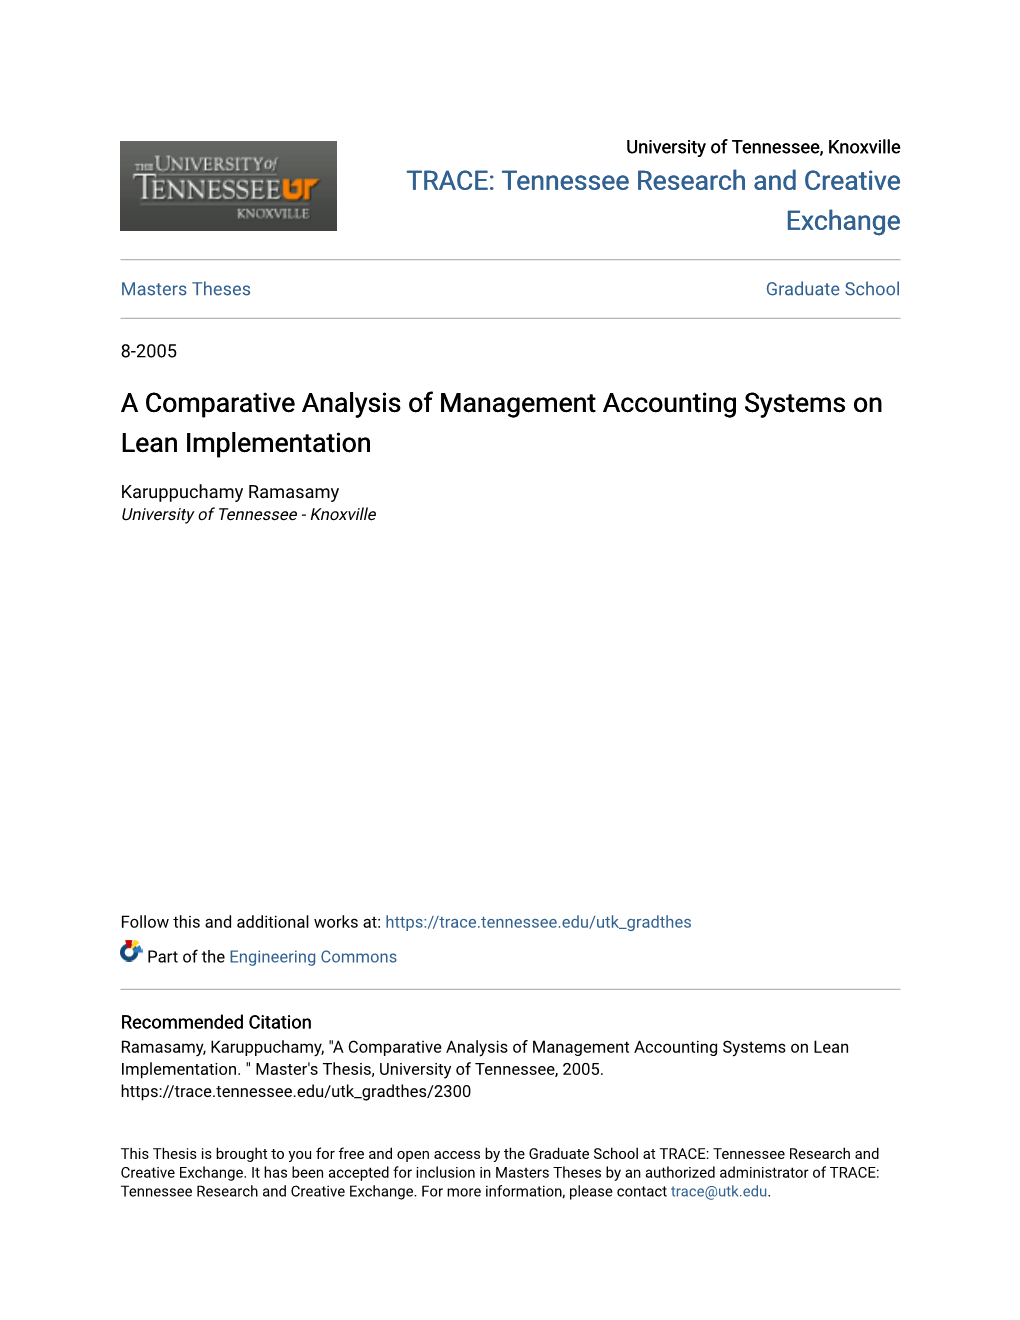 A Comparative Analysis of Management Accounting Systems on Lean Implementation